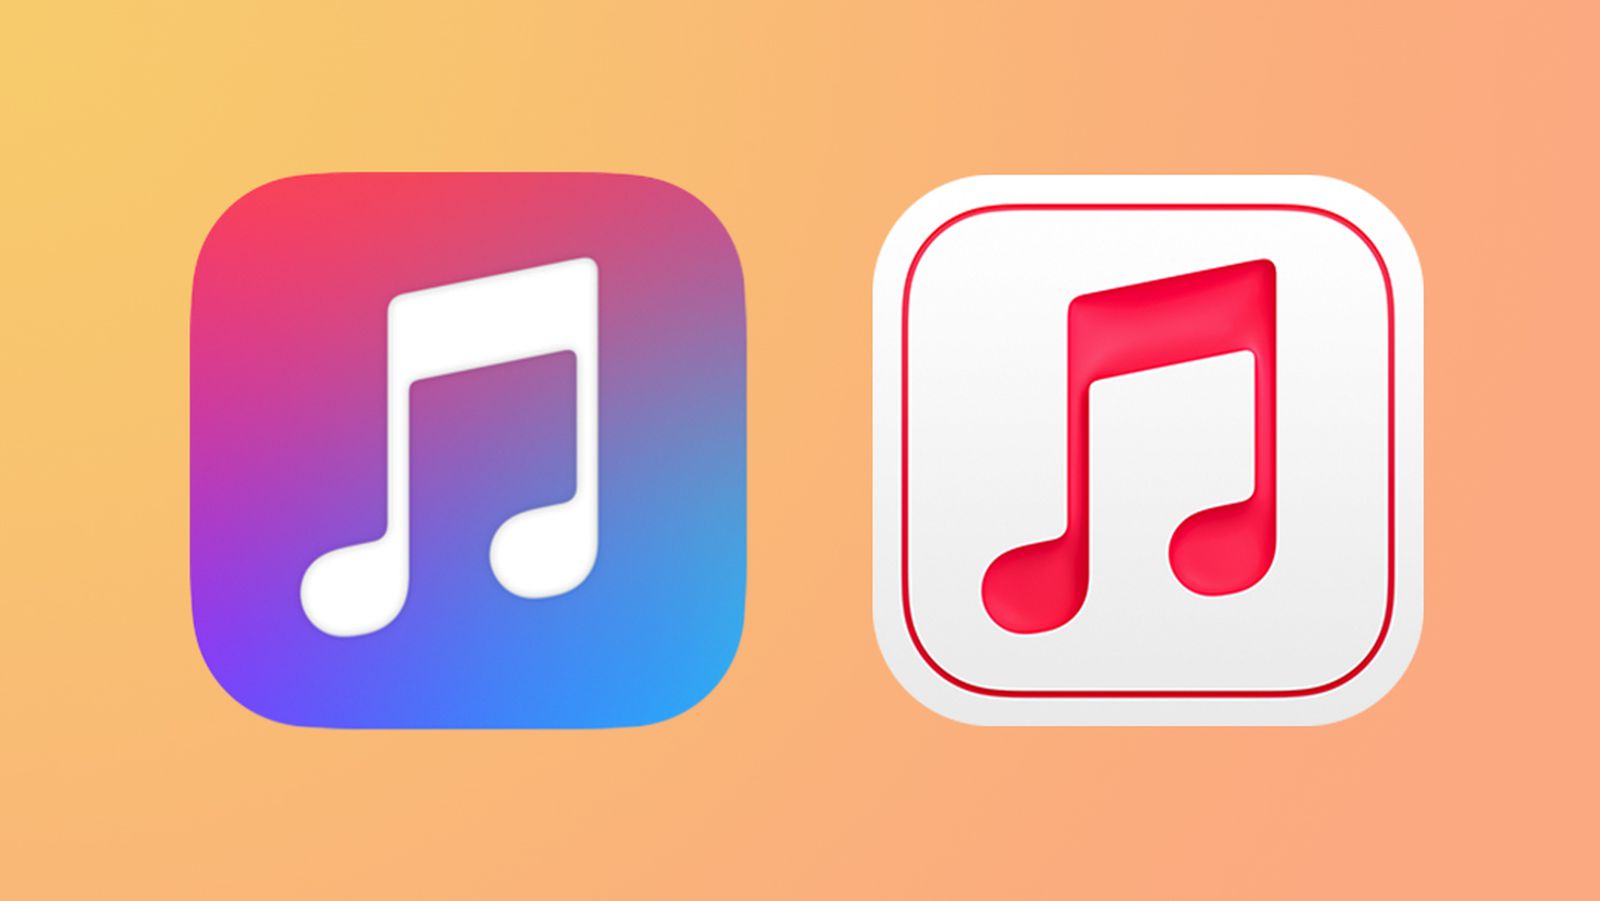 Apple’s redesigned Apple Music icon for artists leads to speculation about iOS 15 design plans